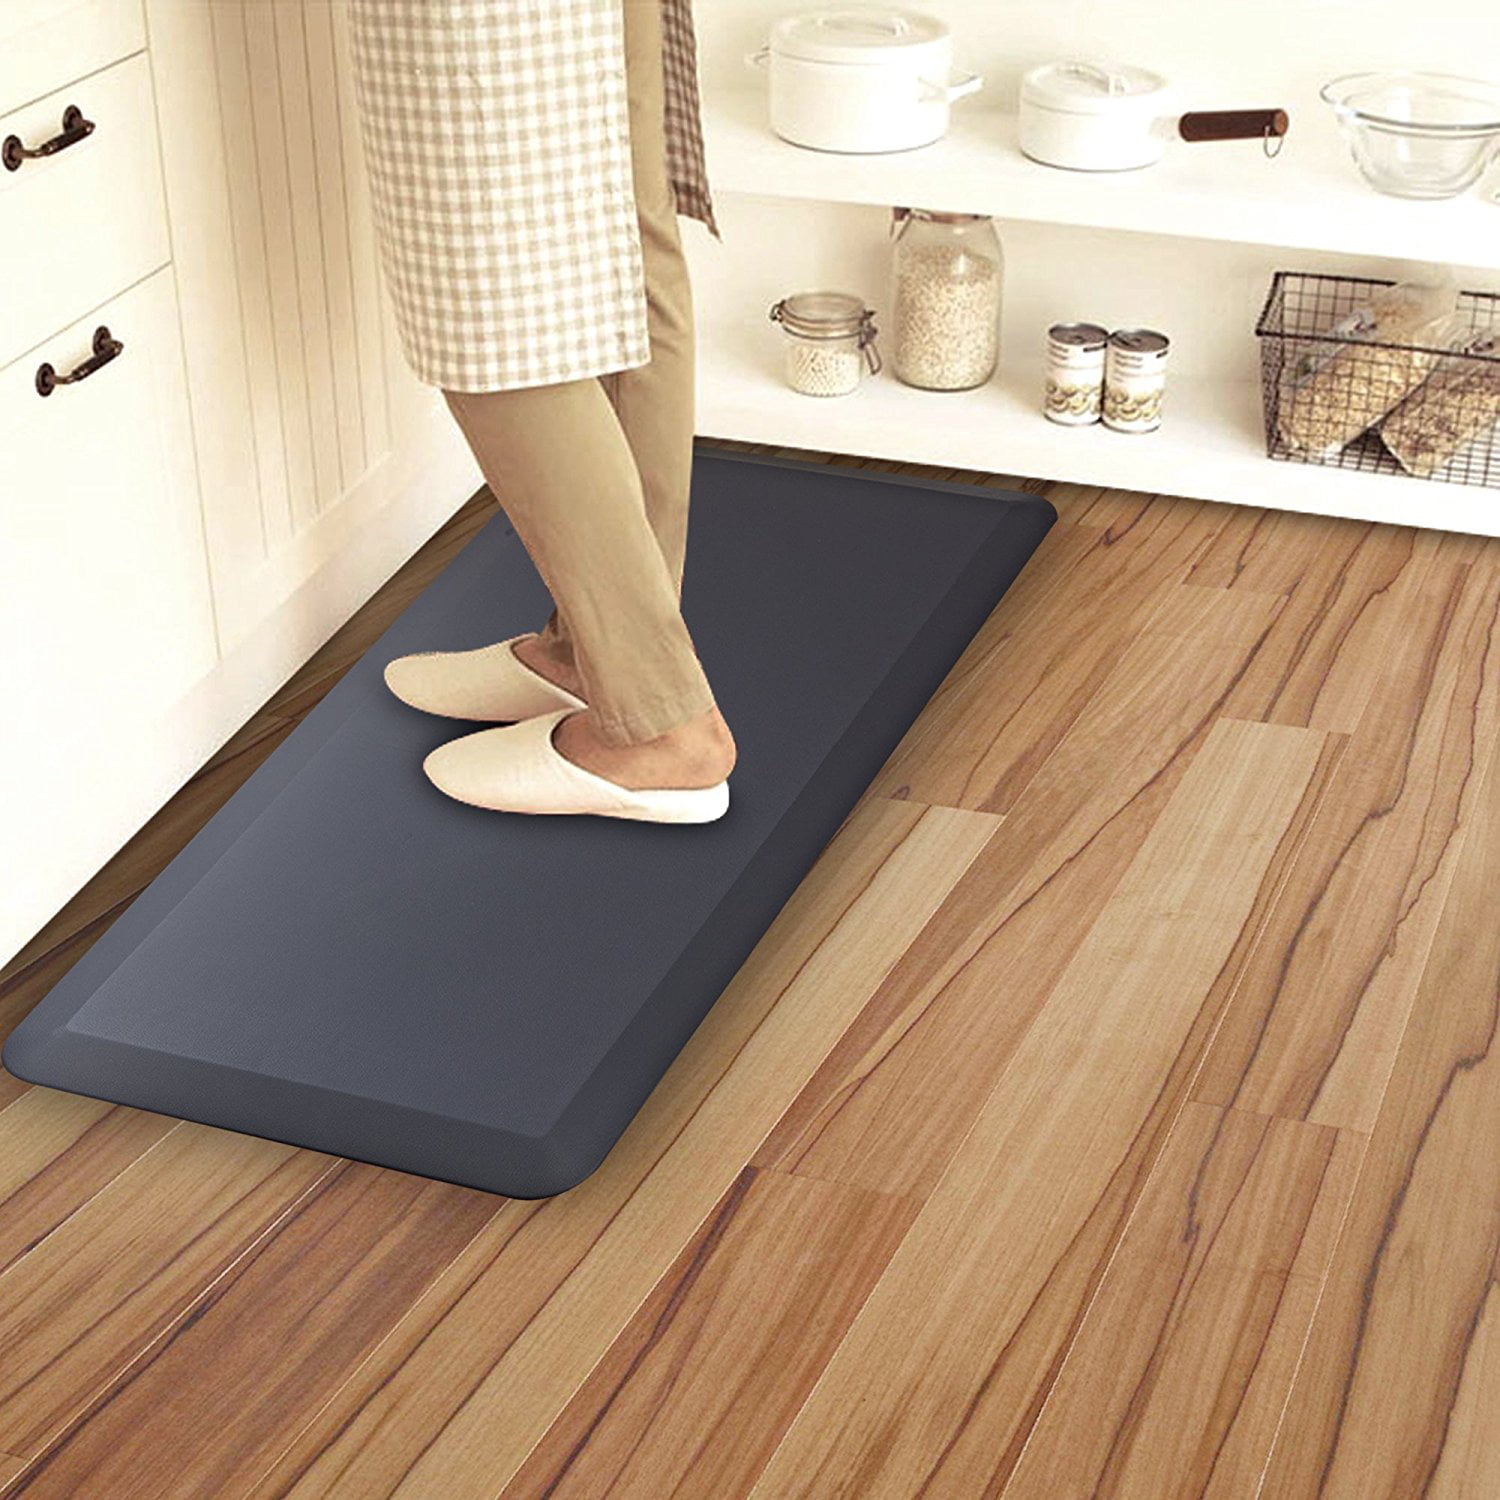  DEXI Kitchen Anti Fatigue Rugs and Floor Mats